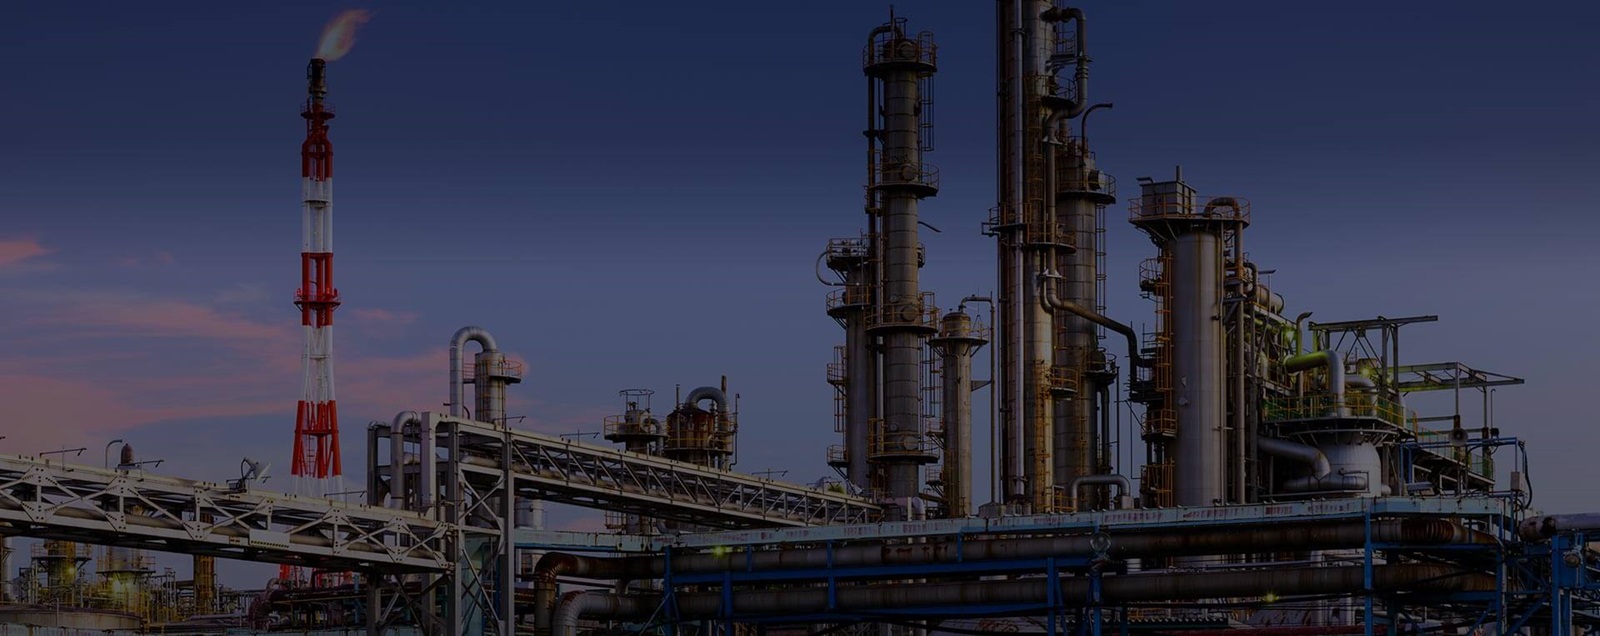 Petrochemical refinery with transformers for harsh environments